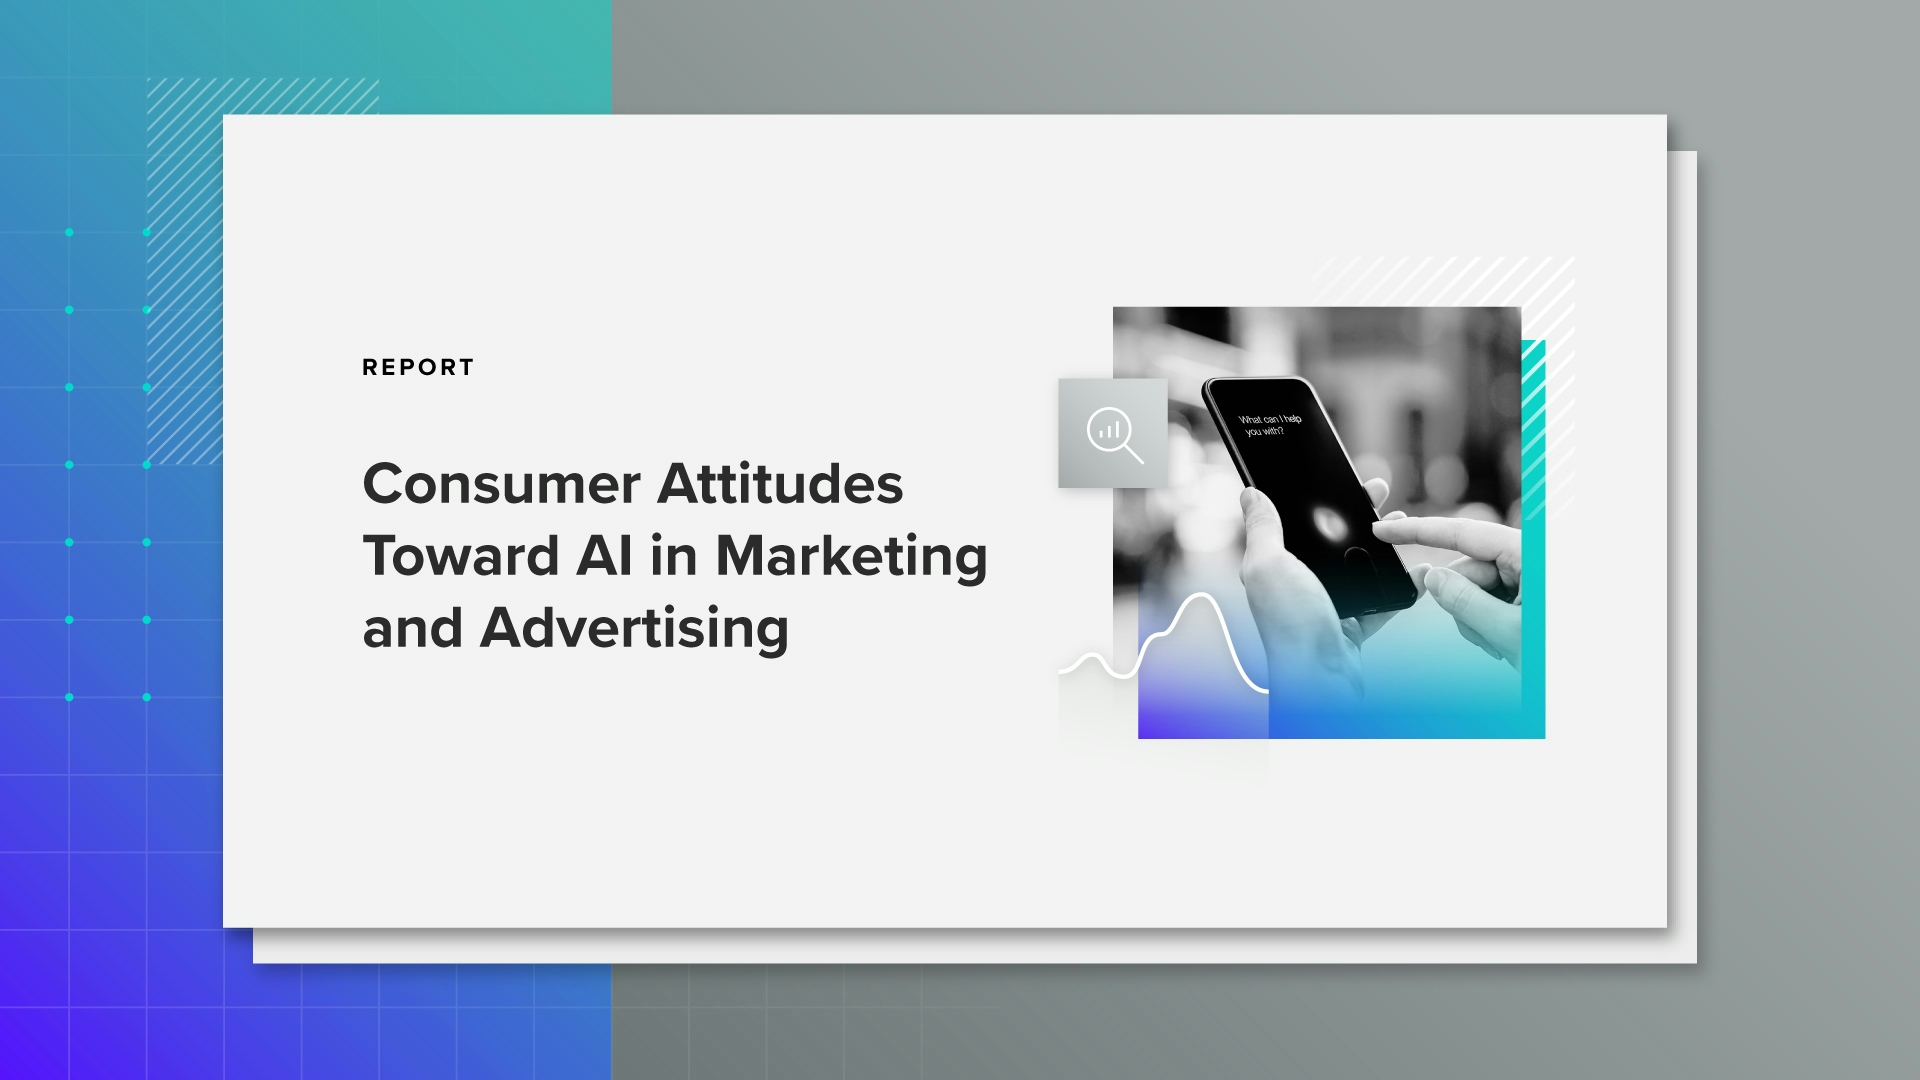 Download the Report: Consumer Attitudes Toward AI in Marketing and Advertising